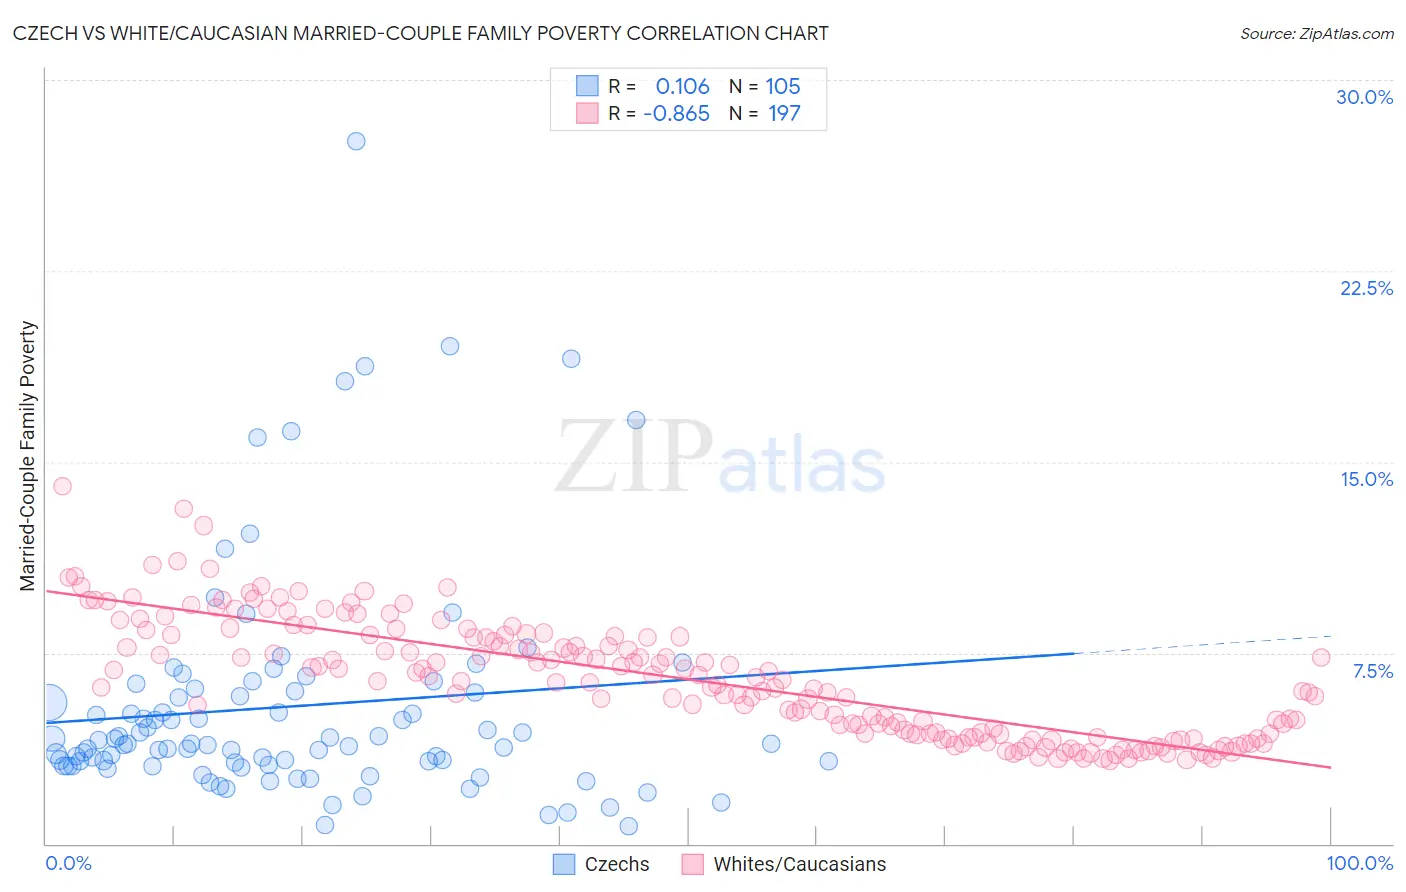 Czech vs White/Caucasian Married-Couple Family Poverty